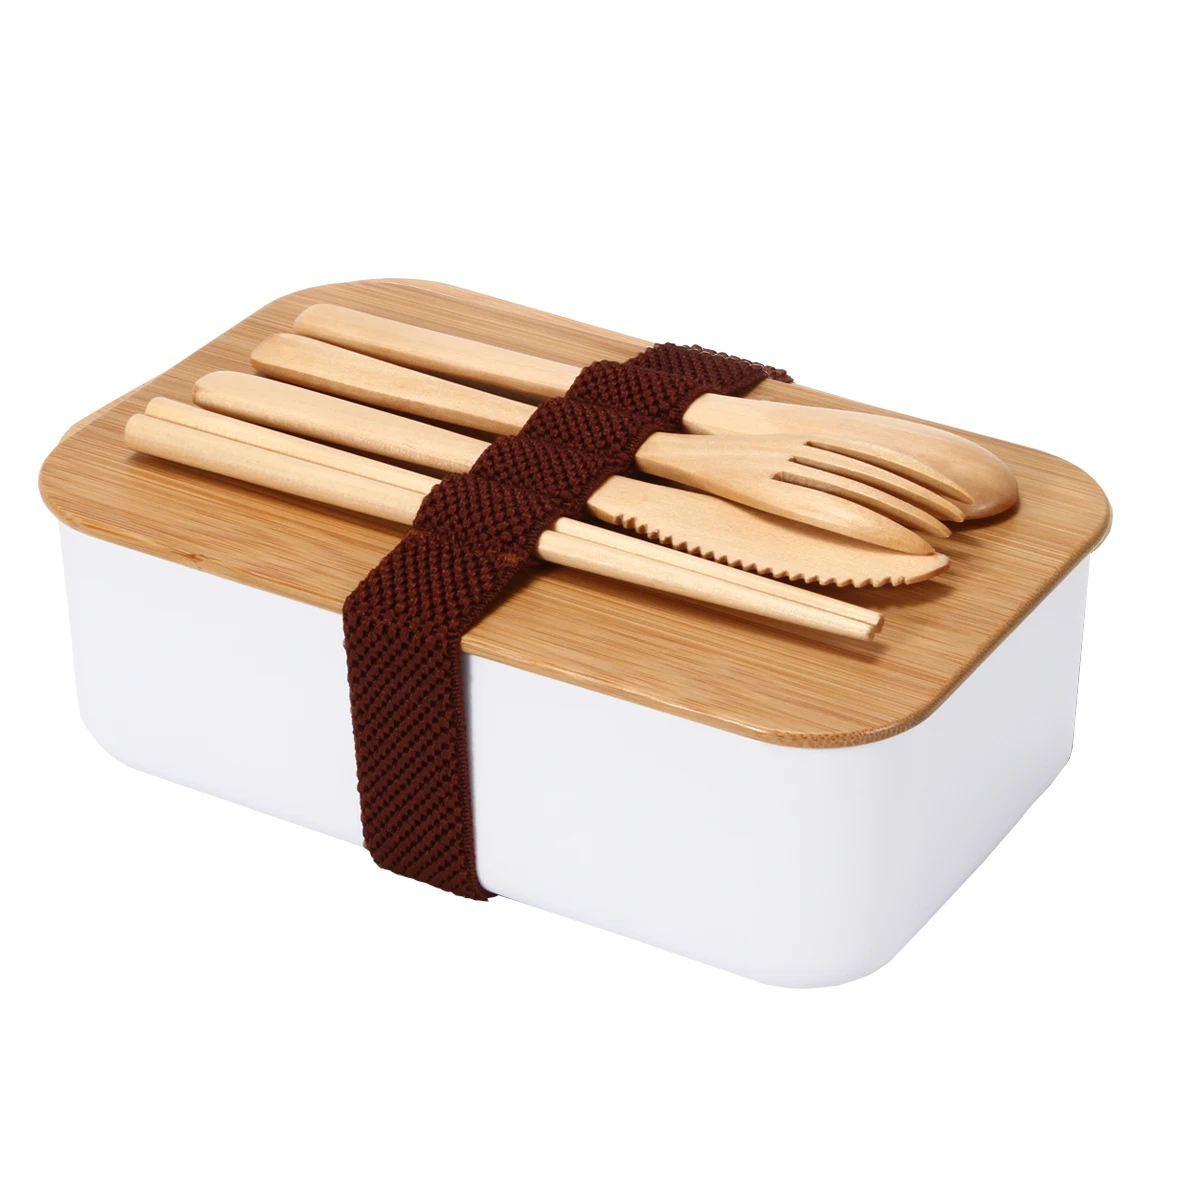 

Eco Friendly Biodegradable 100% PLA Meal Prep Containers Japanese bento Lunch Boxes bamboo lids With A Set Of Knife Fork Spoon, Can be customized